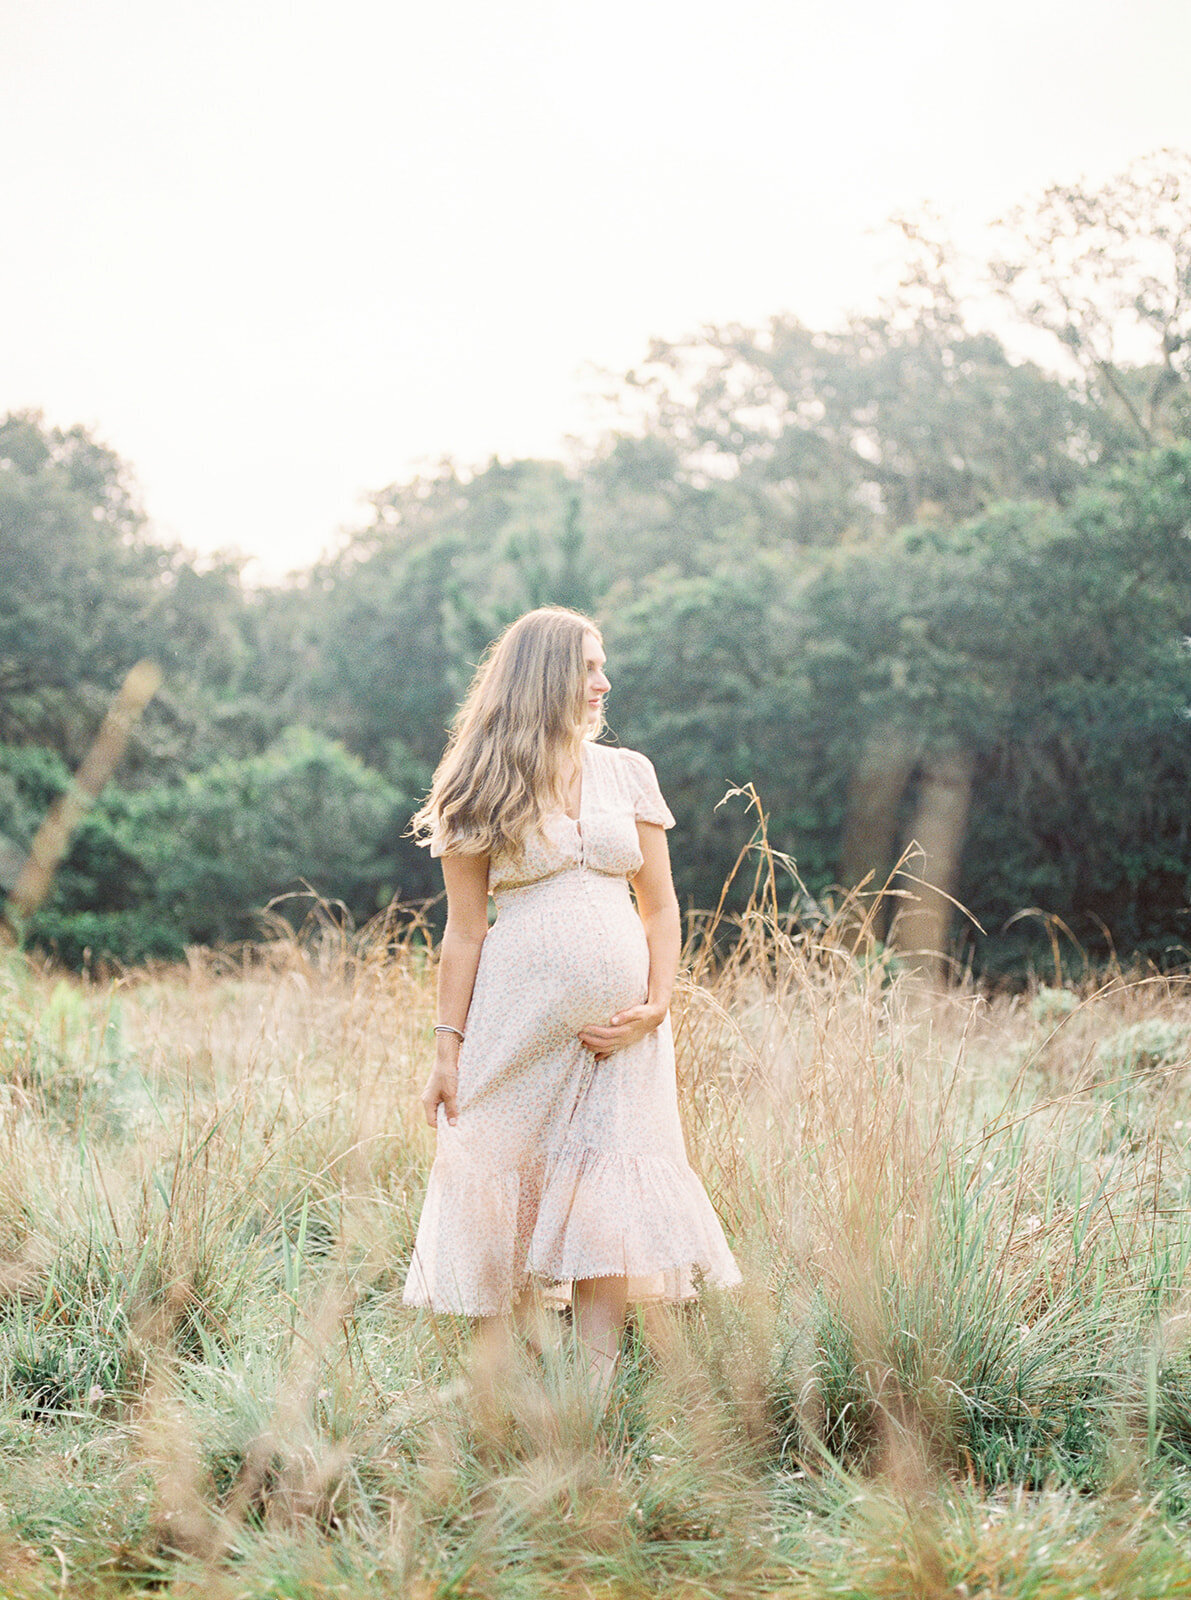 Ethereal portrait of an expectant mother by Orlando maternity photographer.